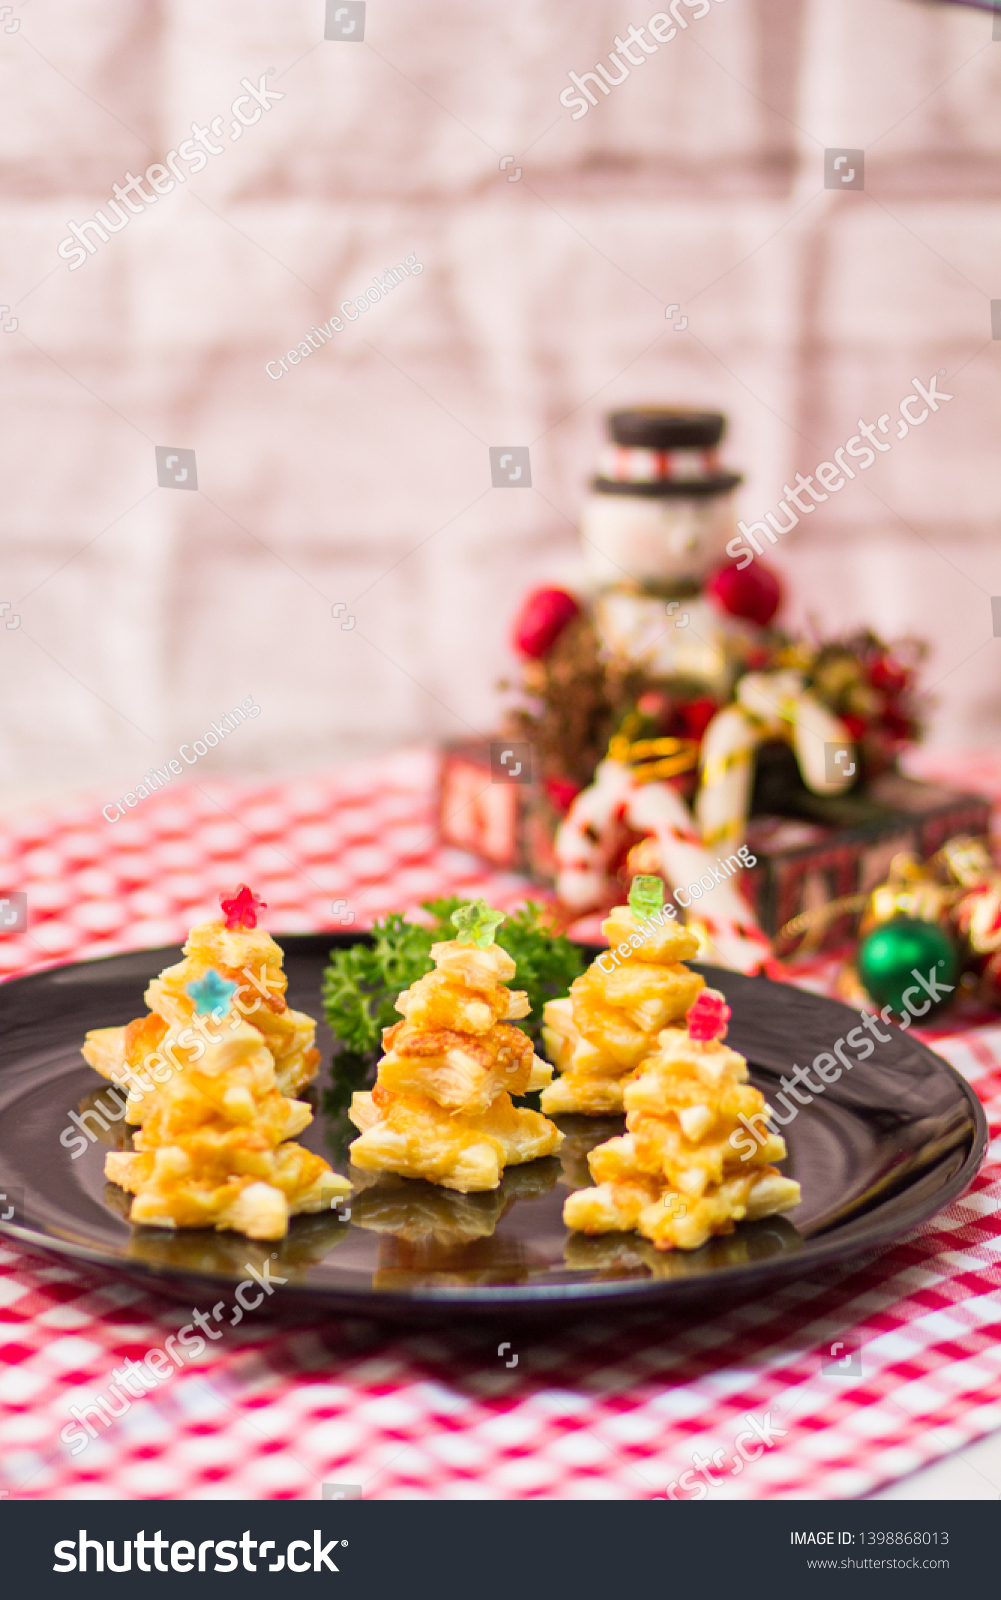 Christmas Tree Cheese Puff Christmas Party Food And Drink Stock Image 1398868013